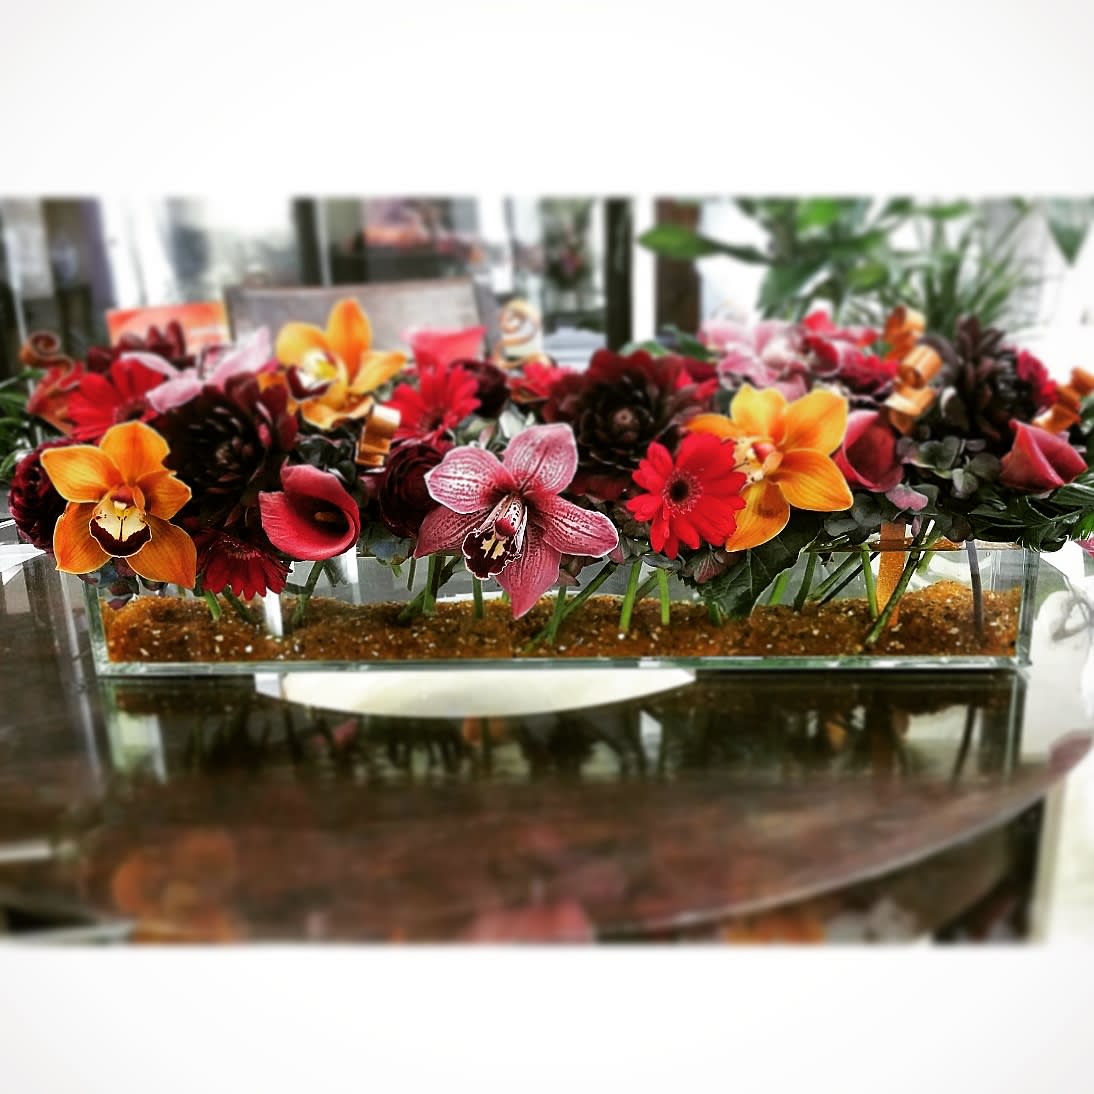 Copper Radiance - A mix of gerberas, hydrangea, callas in rich bold colors adorned with an industrial flare of spiraled cooper, and  gravel to give it a little &quot;natural&quot; mix up.